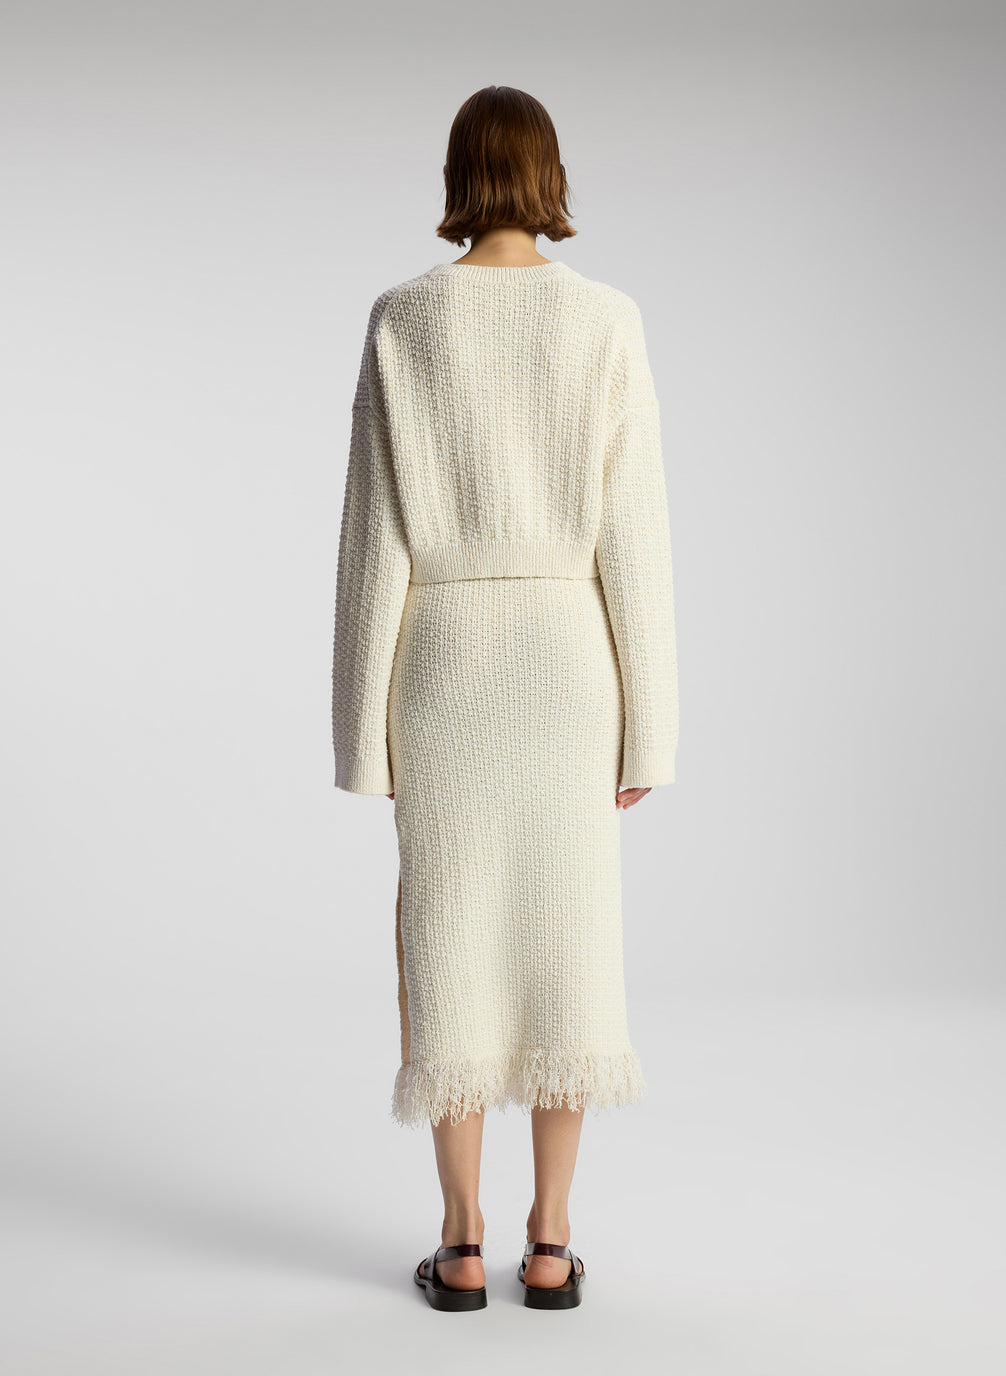 back view of woman wearing white pullover sweater and matching midi skirt